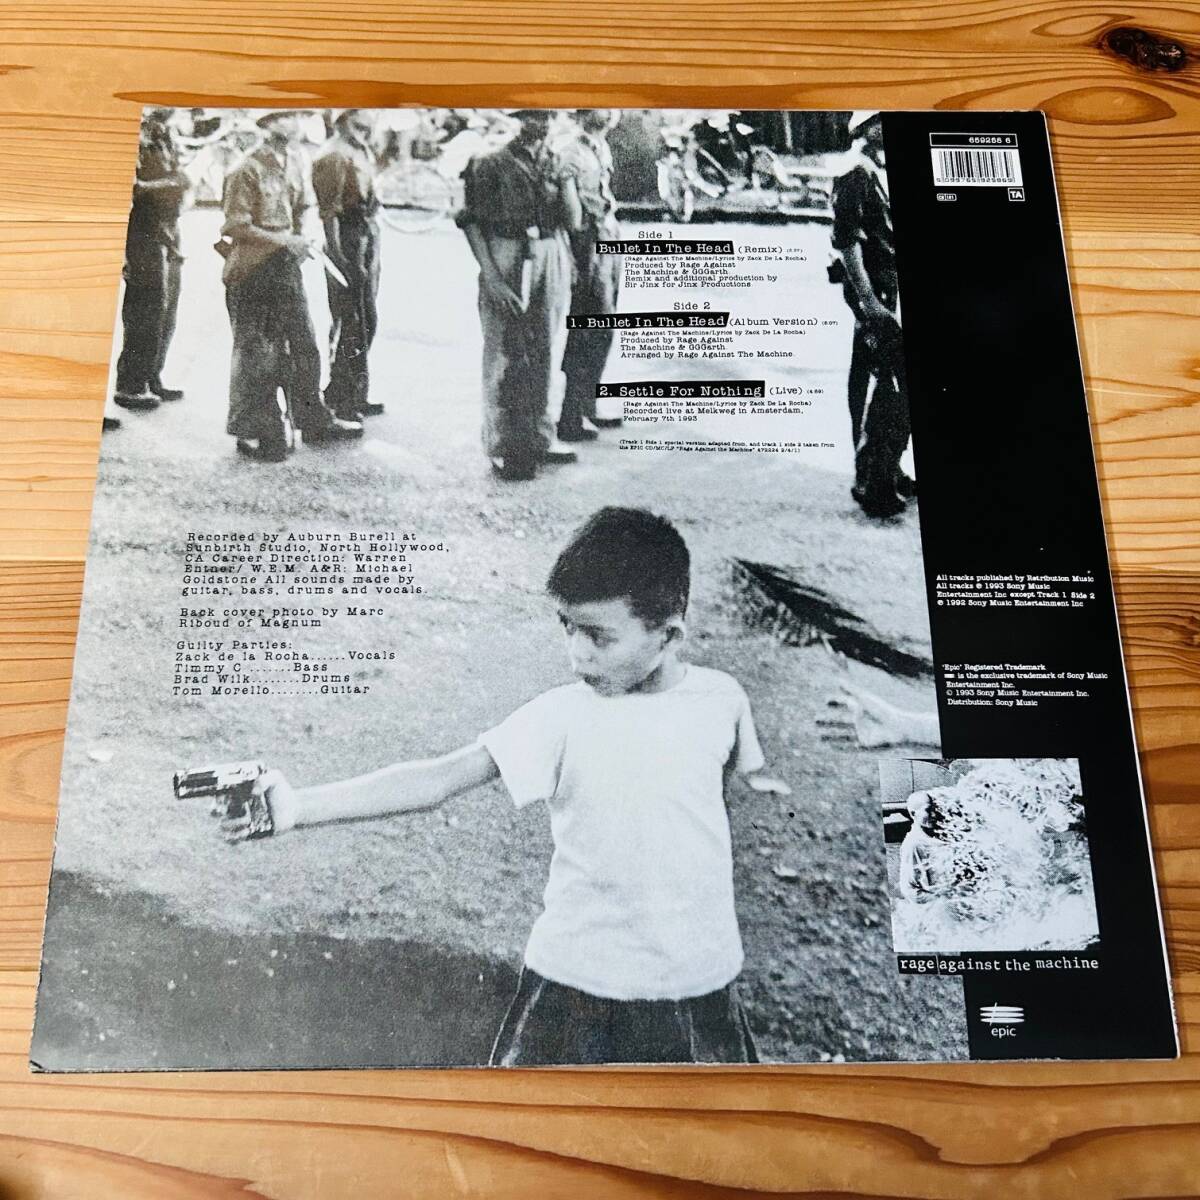 [ rare ] RAGE AGAINST THE MACHINE/Bullet In The Head/UK record / Picture record / Ray ji*age instrument * The * machine /12 -inch single / record 